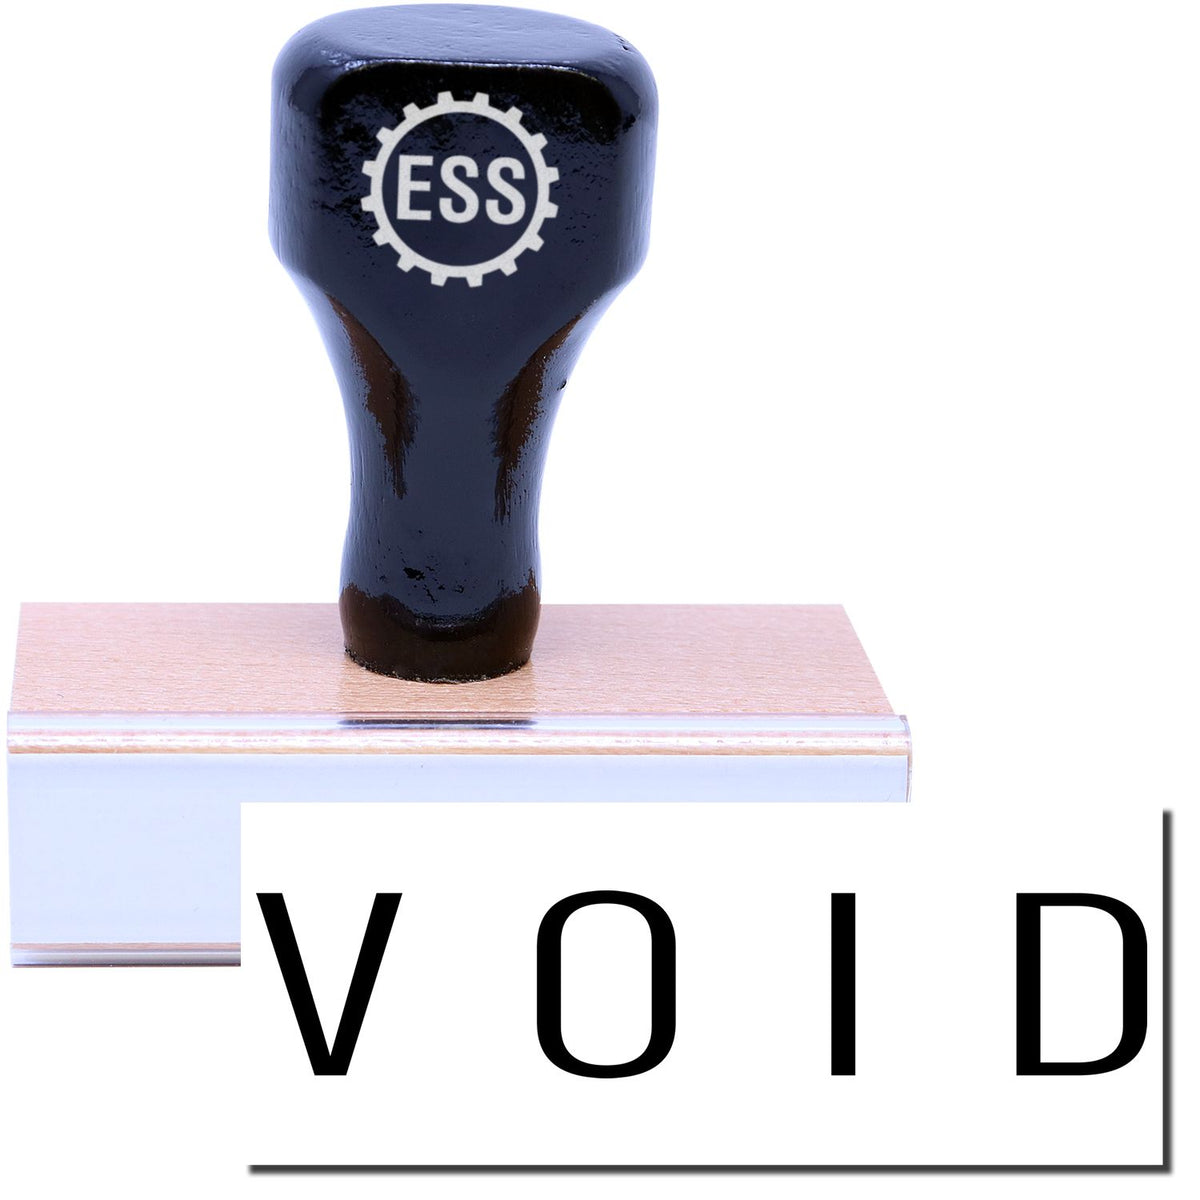 A stock office rubber stamp with a stamped image showing how the text &quot;VOID&quot; in a large narrow font is displayed after stamping.